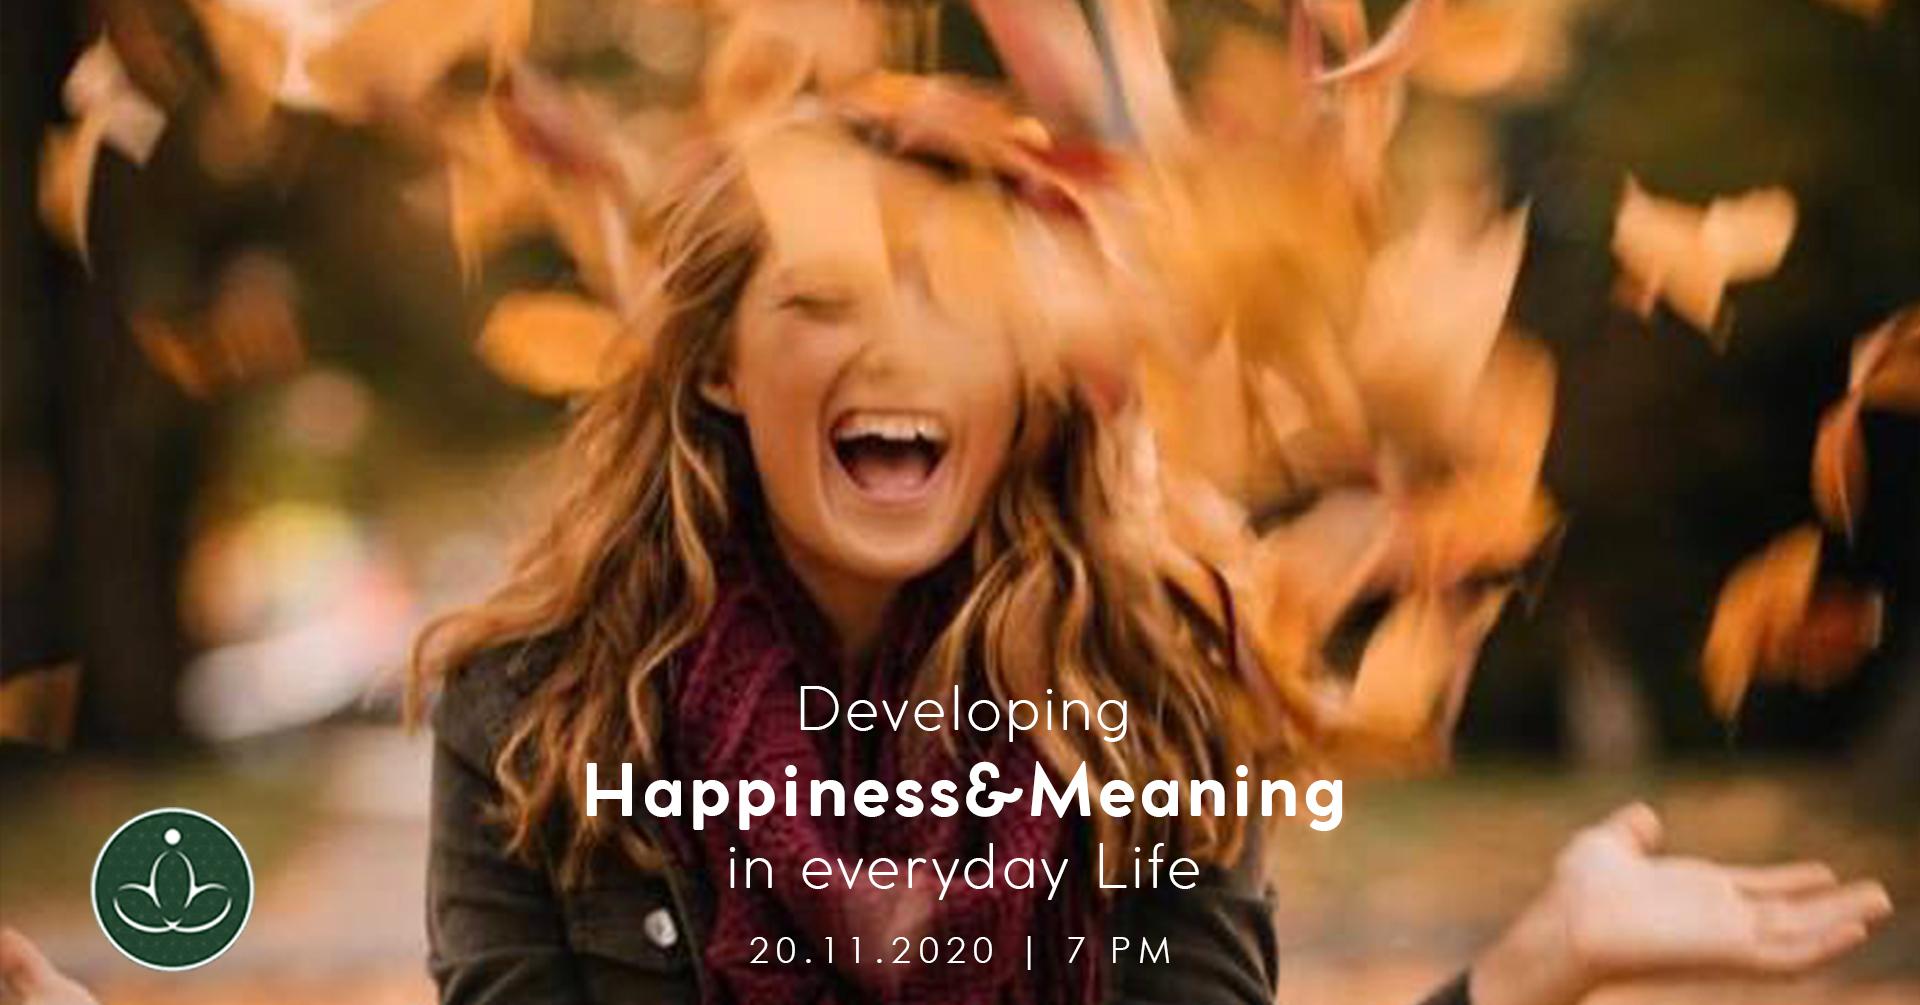 Developing Happiness & Meaning in Everyday Life